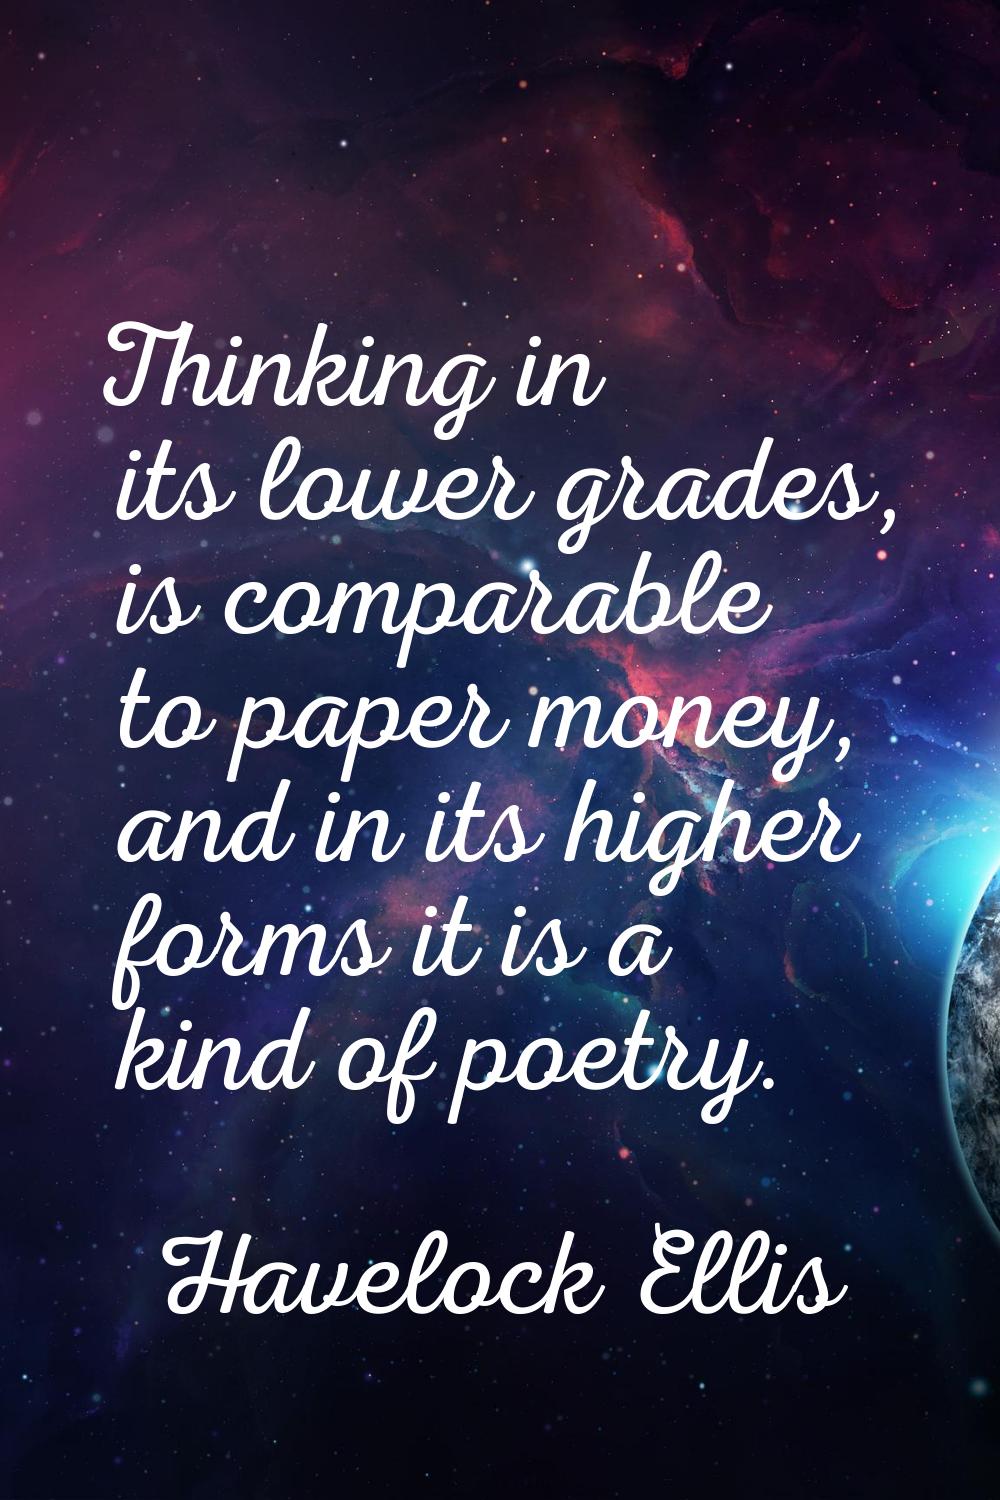 Thinking in its lower grades, is comparable to paper money, and in its higher forms it is a kind of